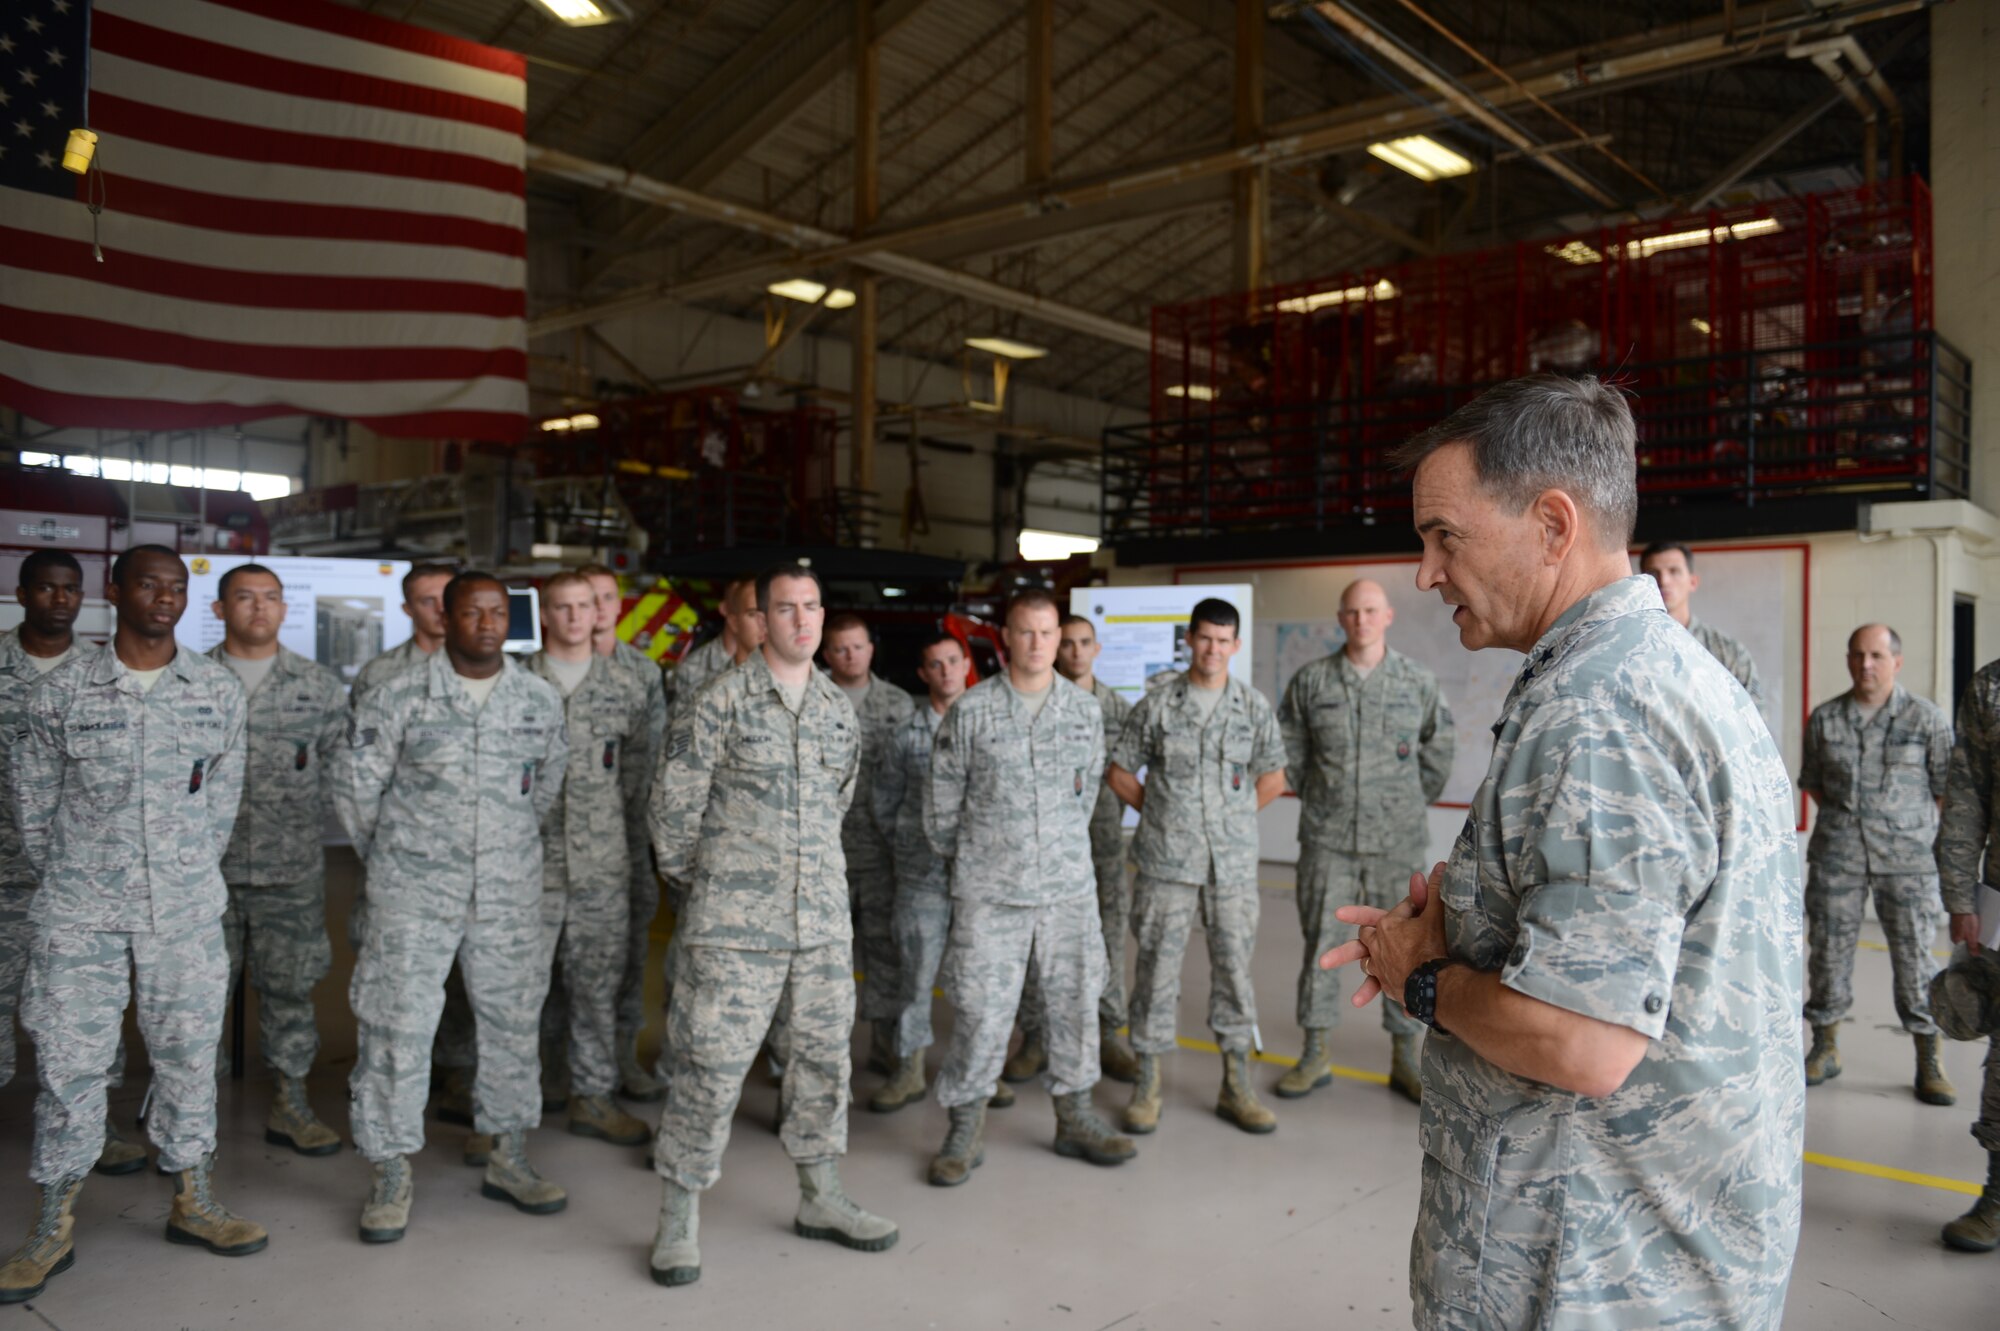 Maj. Gen Jake Polumbo, 9th Air Force commander, speaks to members of 20th Civil Engineer Squadron’s Fire Department about the importance of their job during a tour of 20th Fighter Wing at Shaw Air Force Base, S.C., July 1, 2013. With members of Shaw’s leadership, Polumbo visited various units within 20th FW including 20th Component Maintenance Squadron Propulsion Flight, 20th Medical Group and 20th Maintenance Group. He also toured the McElveen Resource Center and the dorms. (U.S. Air Force photo by Airman 1st Class Krystal M. Jeffers/Released)